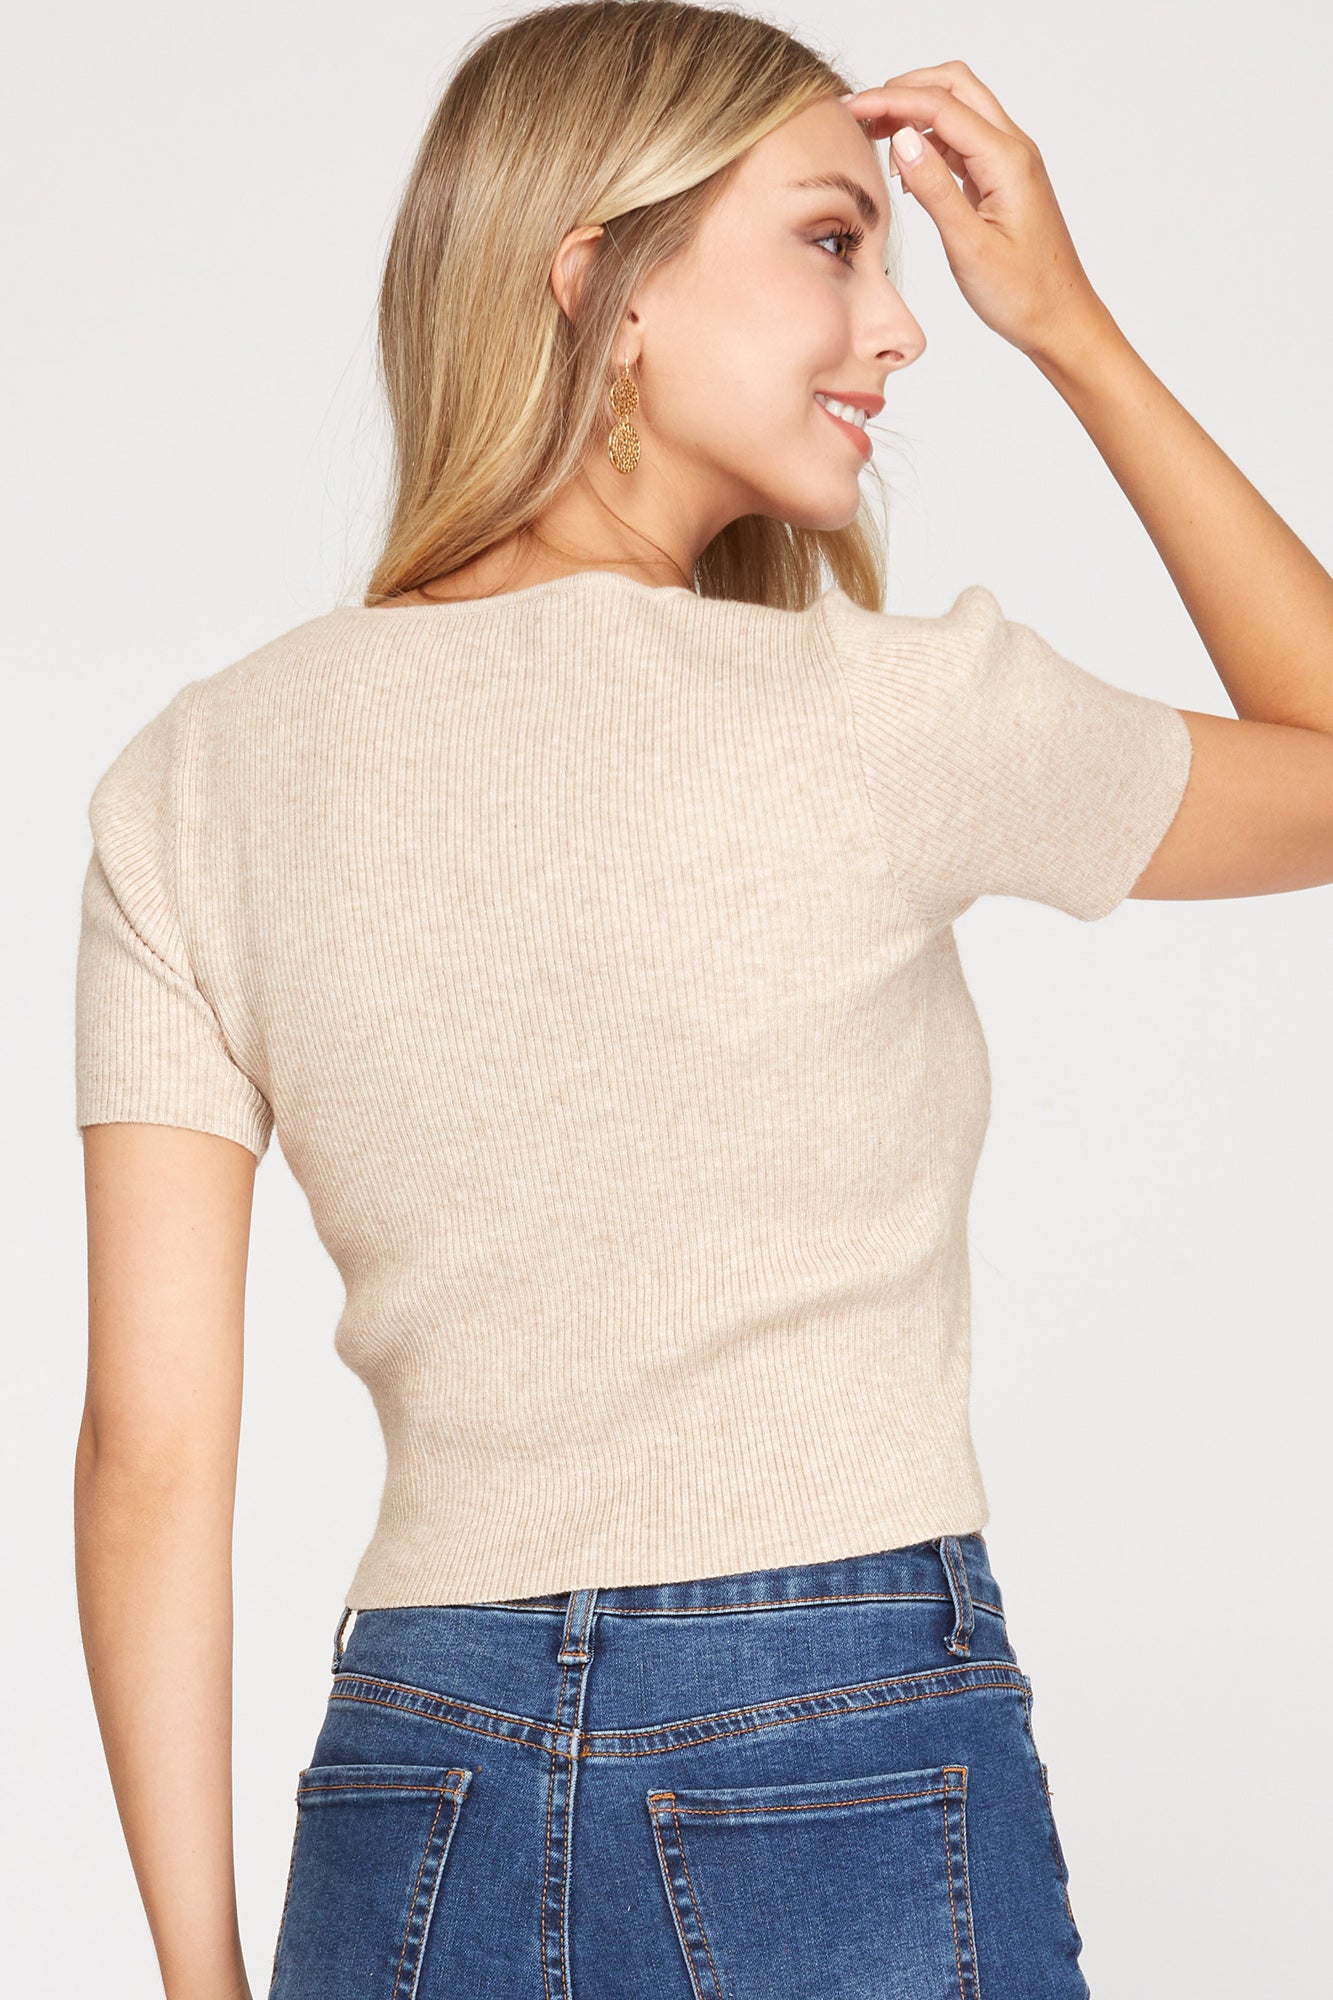 Knit Sweater Tie Taupe Crop Top